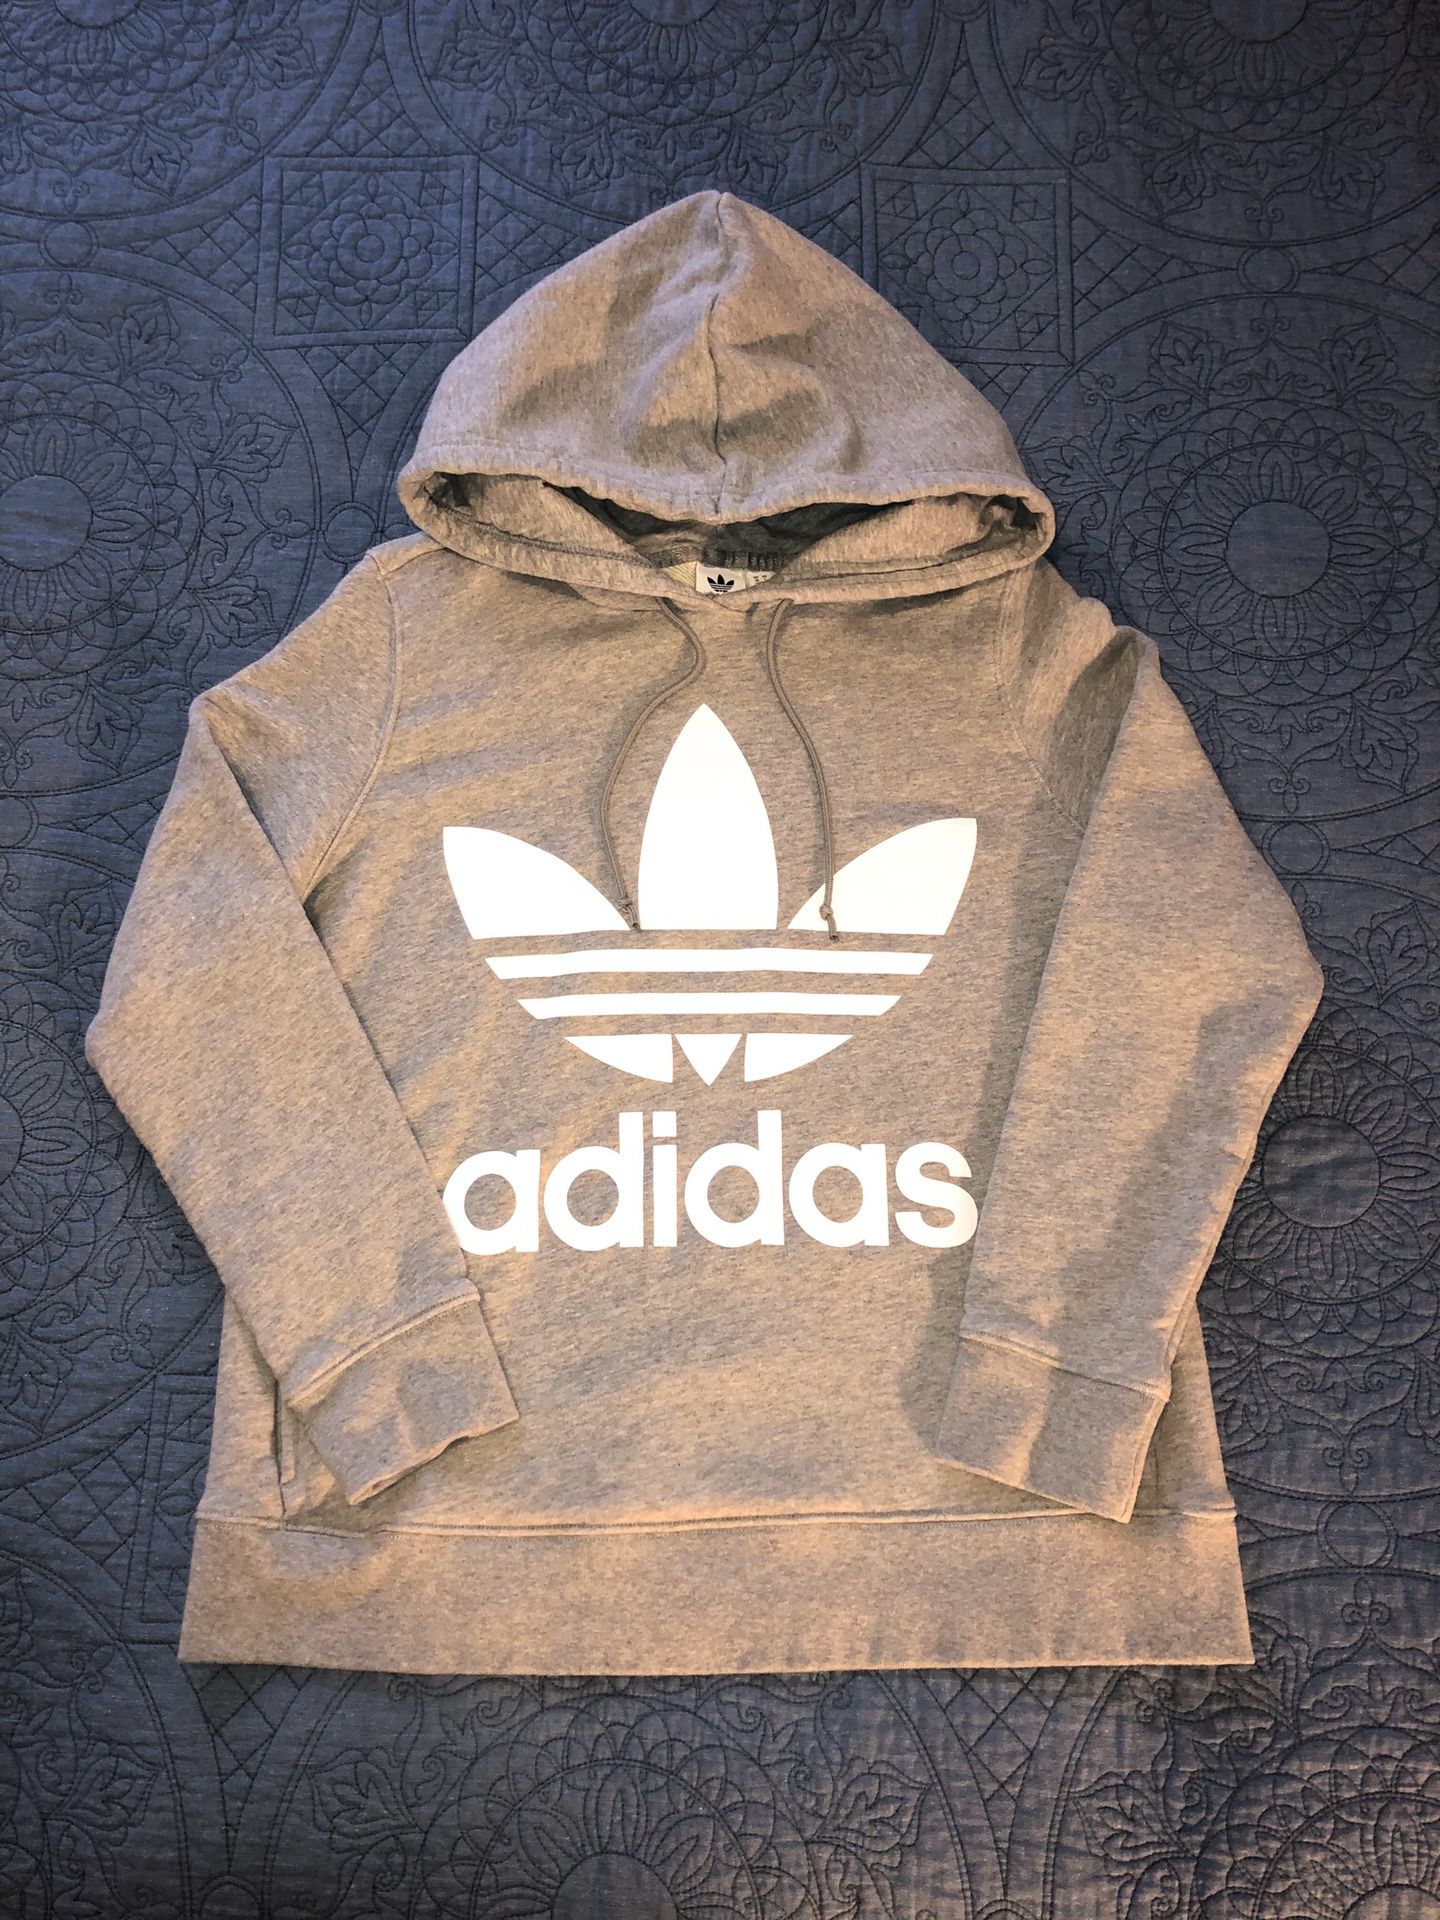 Adidas Originals Trefoil Pullover Hoodie Grey/White Size Large